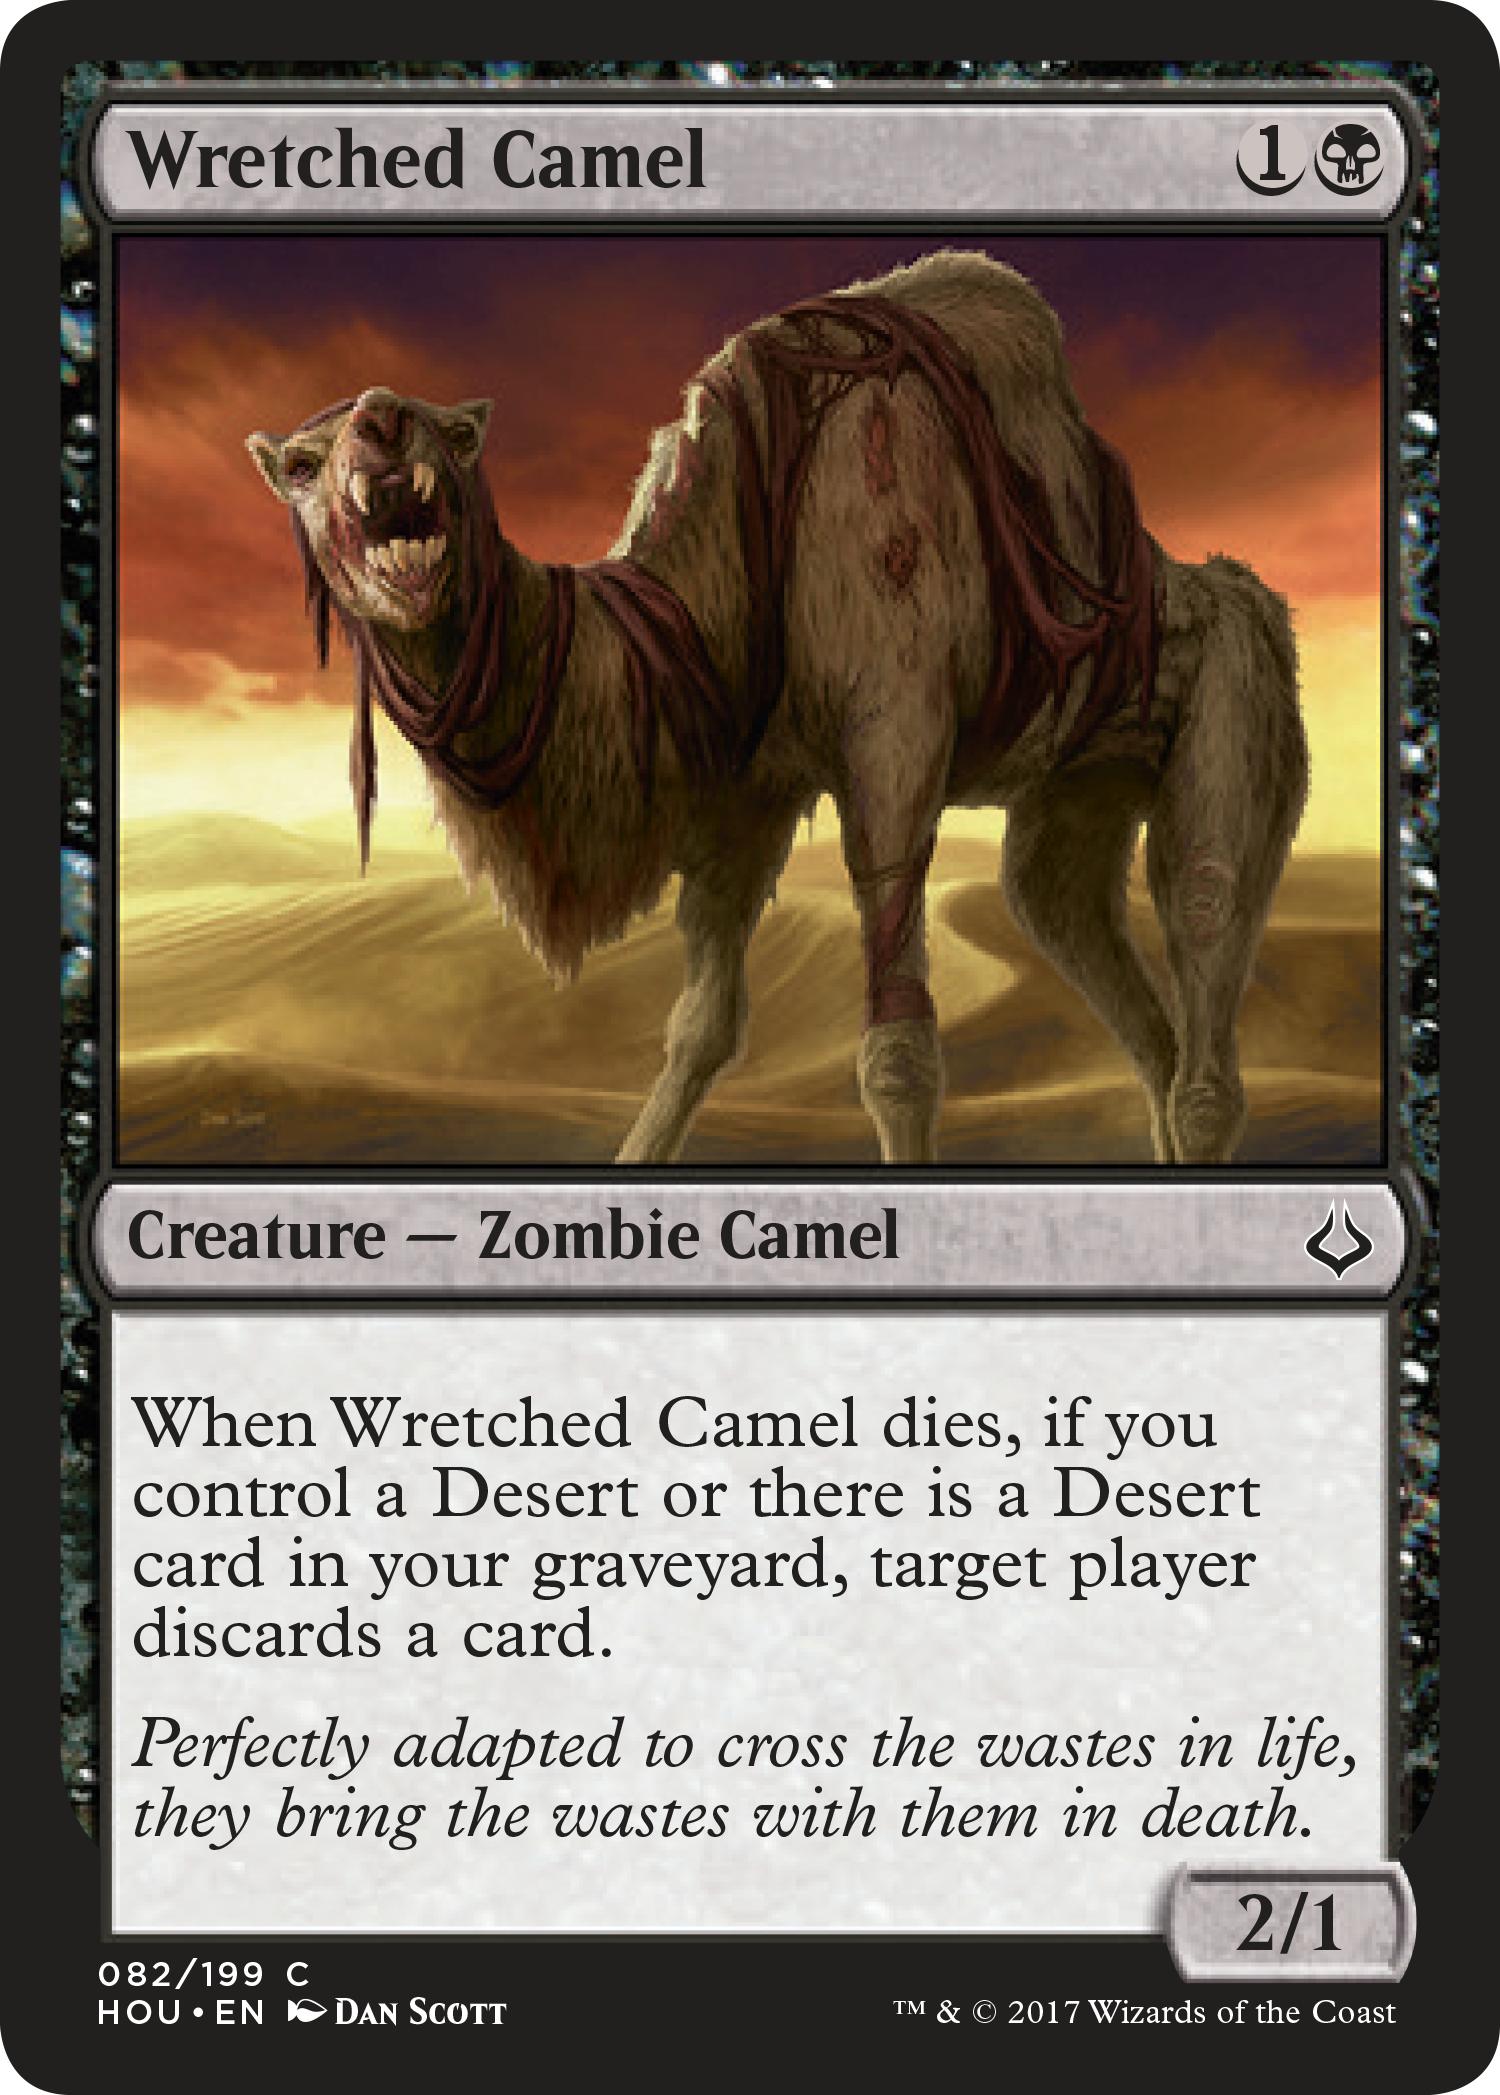 Featured card: Wretched Camel